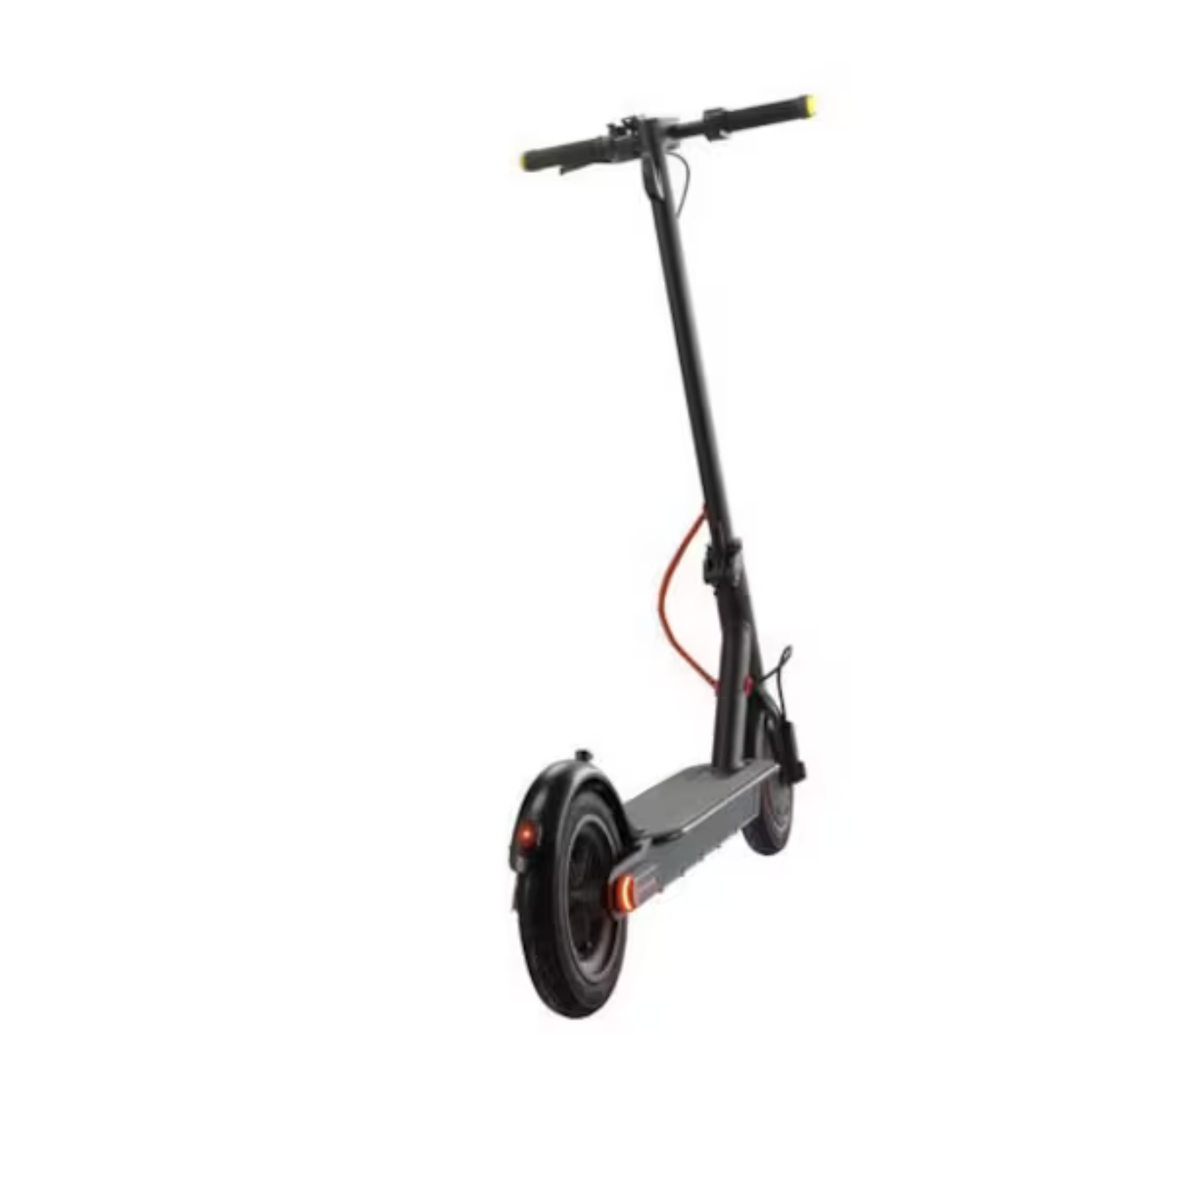 Mytoys Electric Scooter with Flashing Front and Rear Turn Signals, 350 W, 45 km/h, Black, MT750